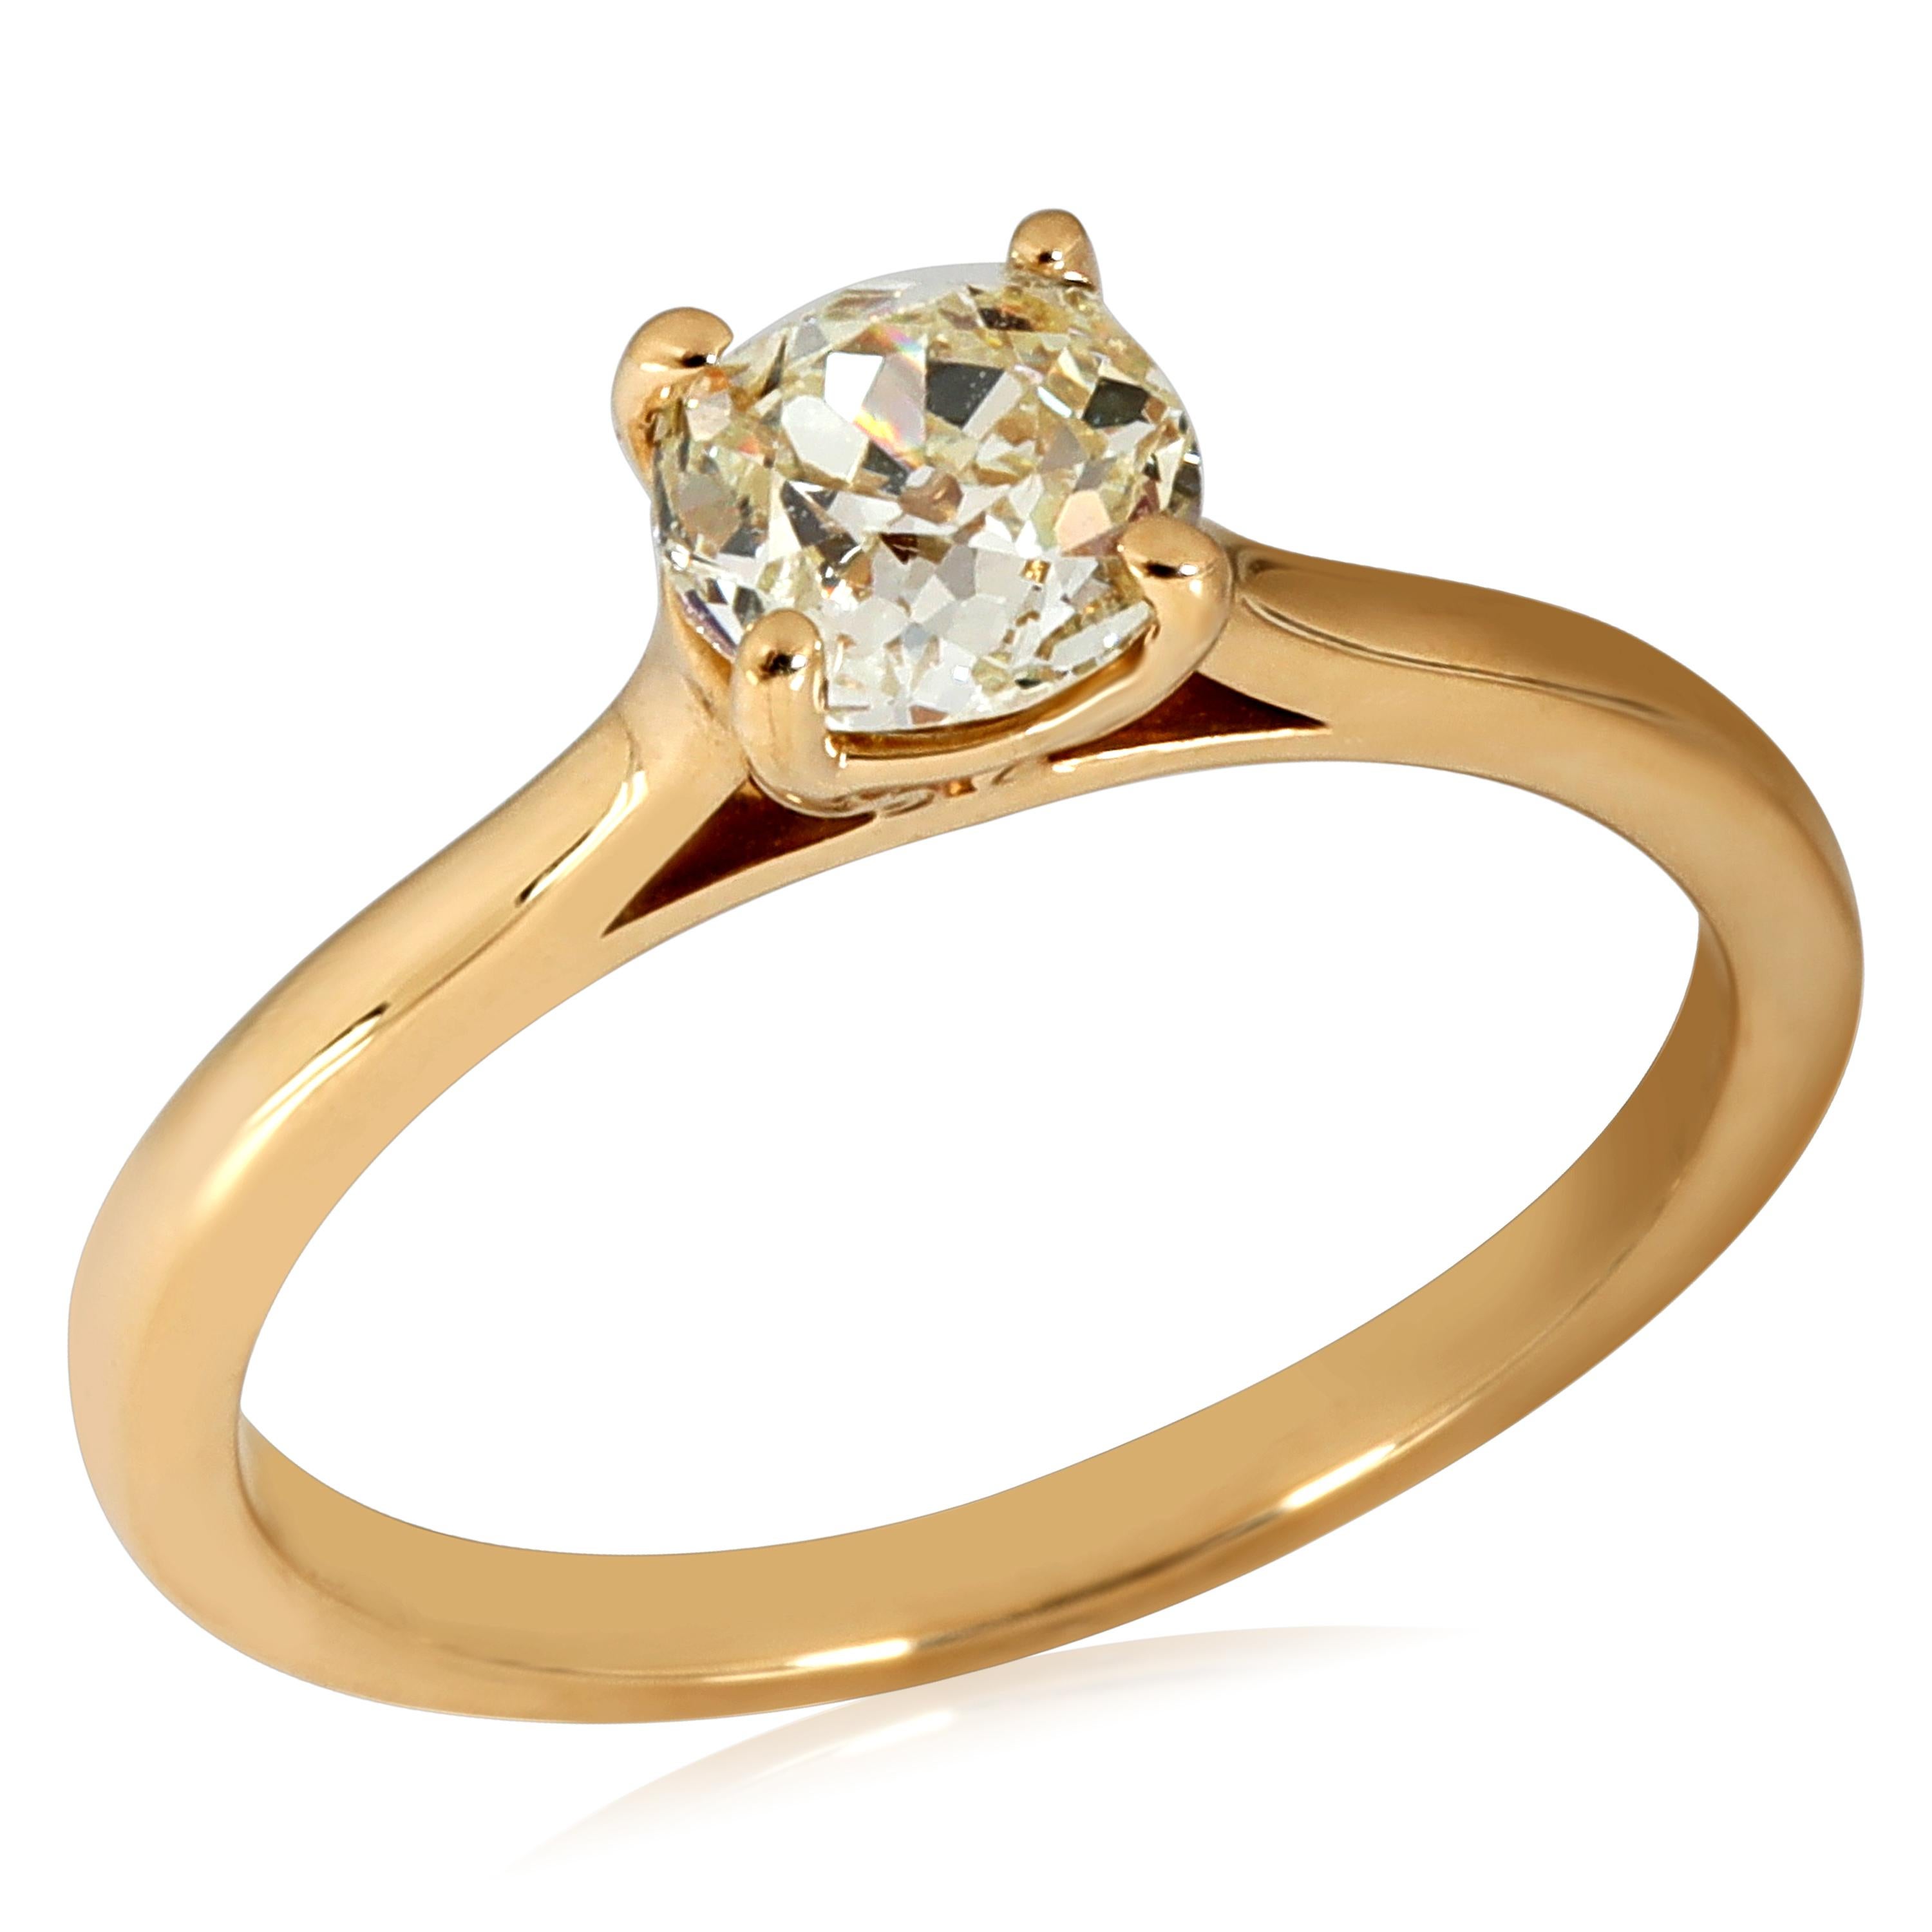 GIA Certified Old Mine Cut Diamond Engagement Ring in 14K Yellow Gold 0.79 CTW

PRIMARY DETAILS
SKU: 101138
Listing Title: GIA Certified Old Mine Cut Diamond Engagement Ring in 14K Yellow Gold 0.79 CTW
Condition Description: Retails for 2600 USD.